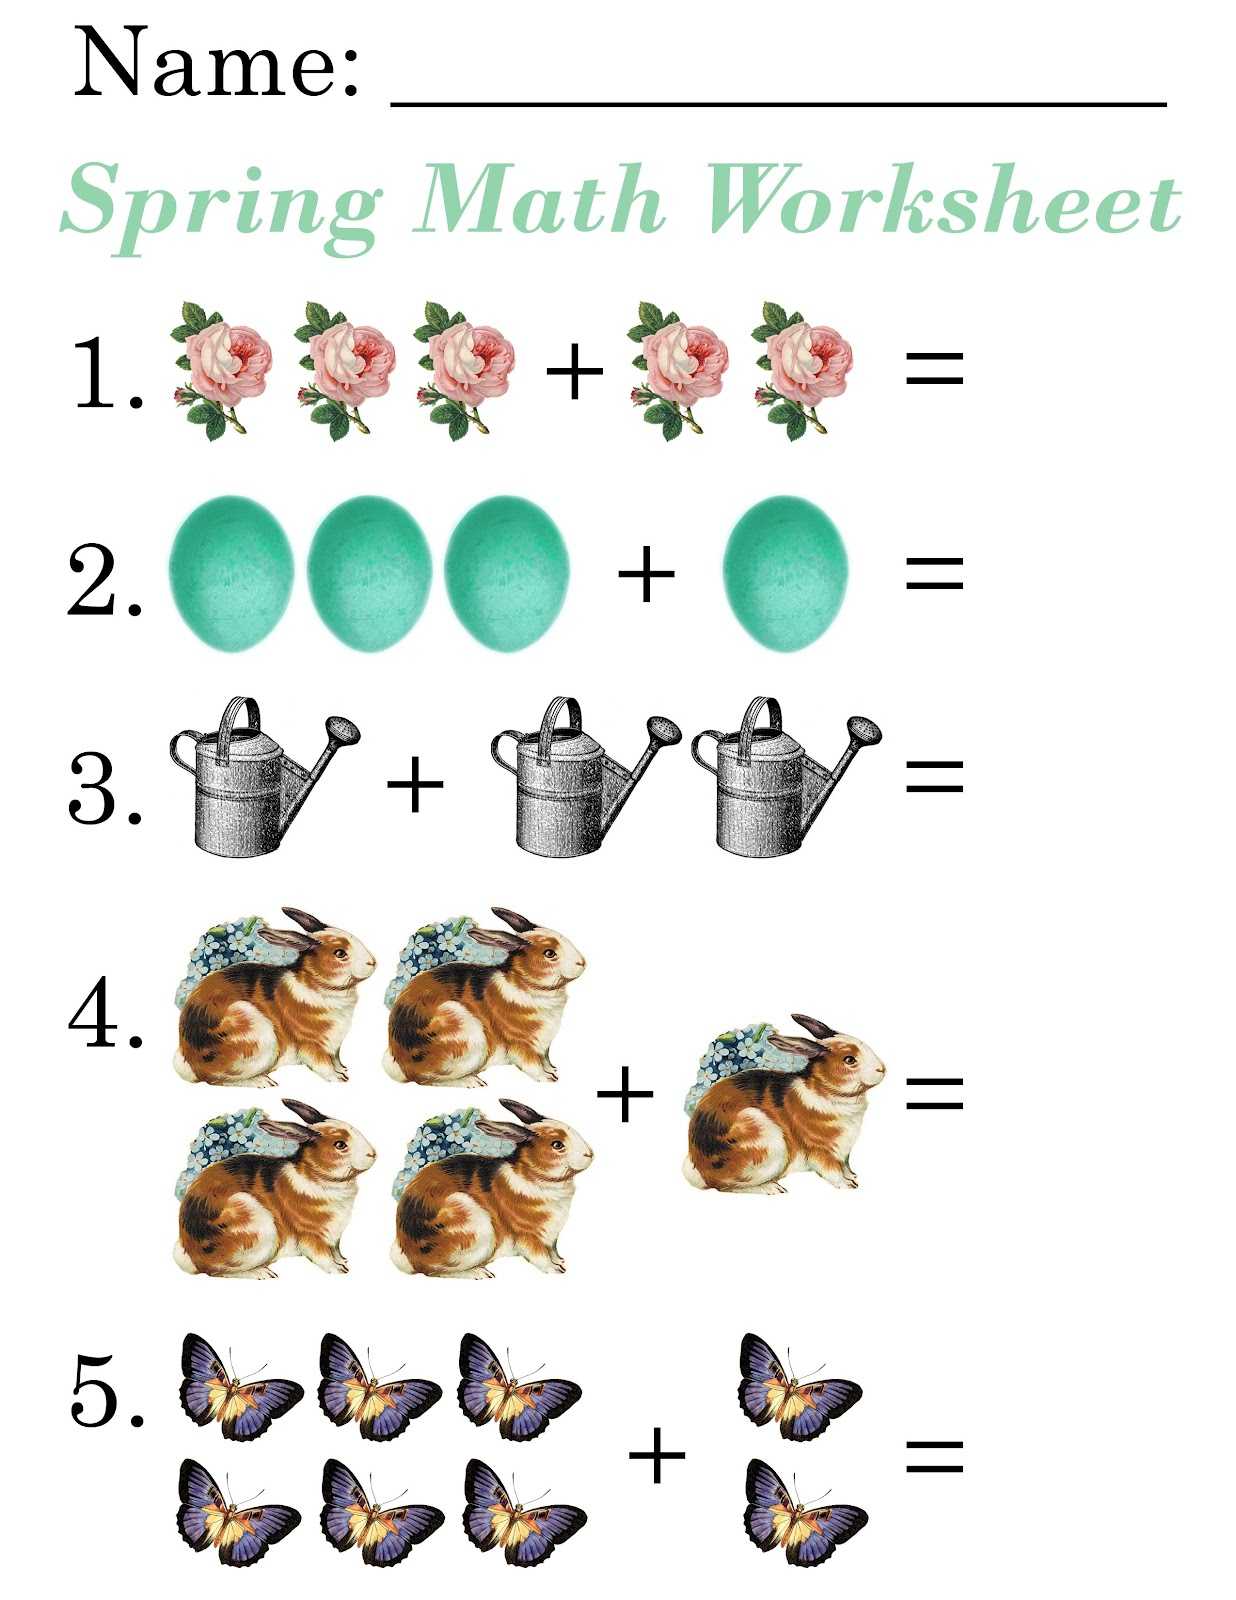 Counting Worksheets for Preschool or Free Worksheets Library Download and Print Worksheets